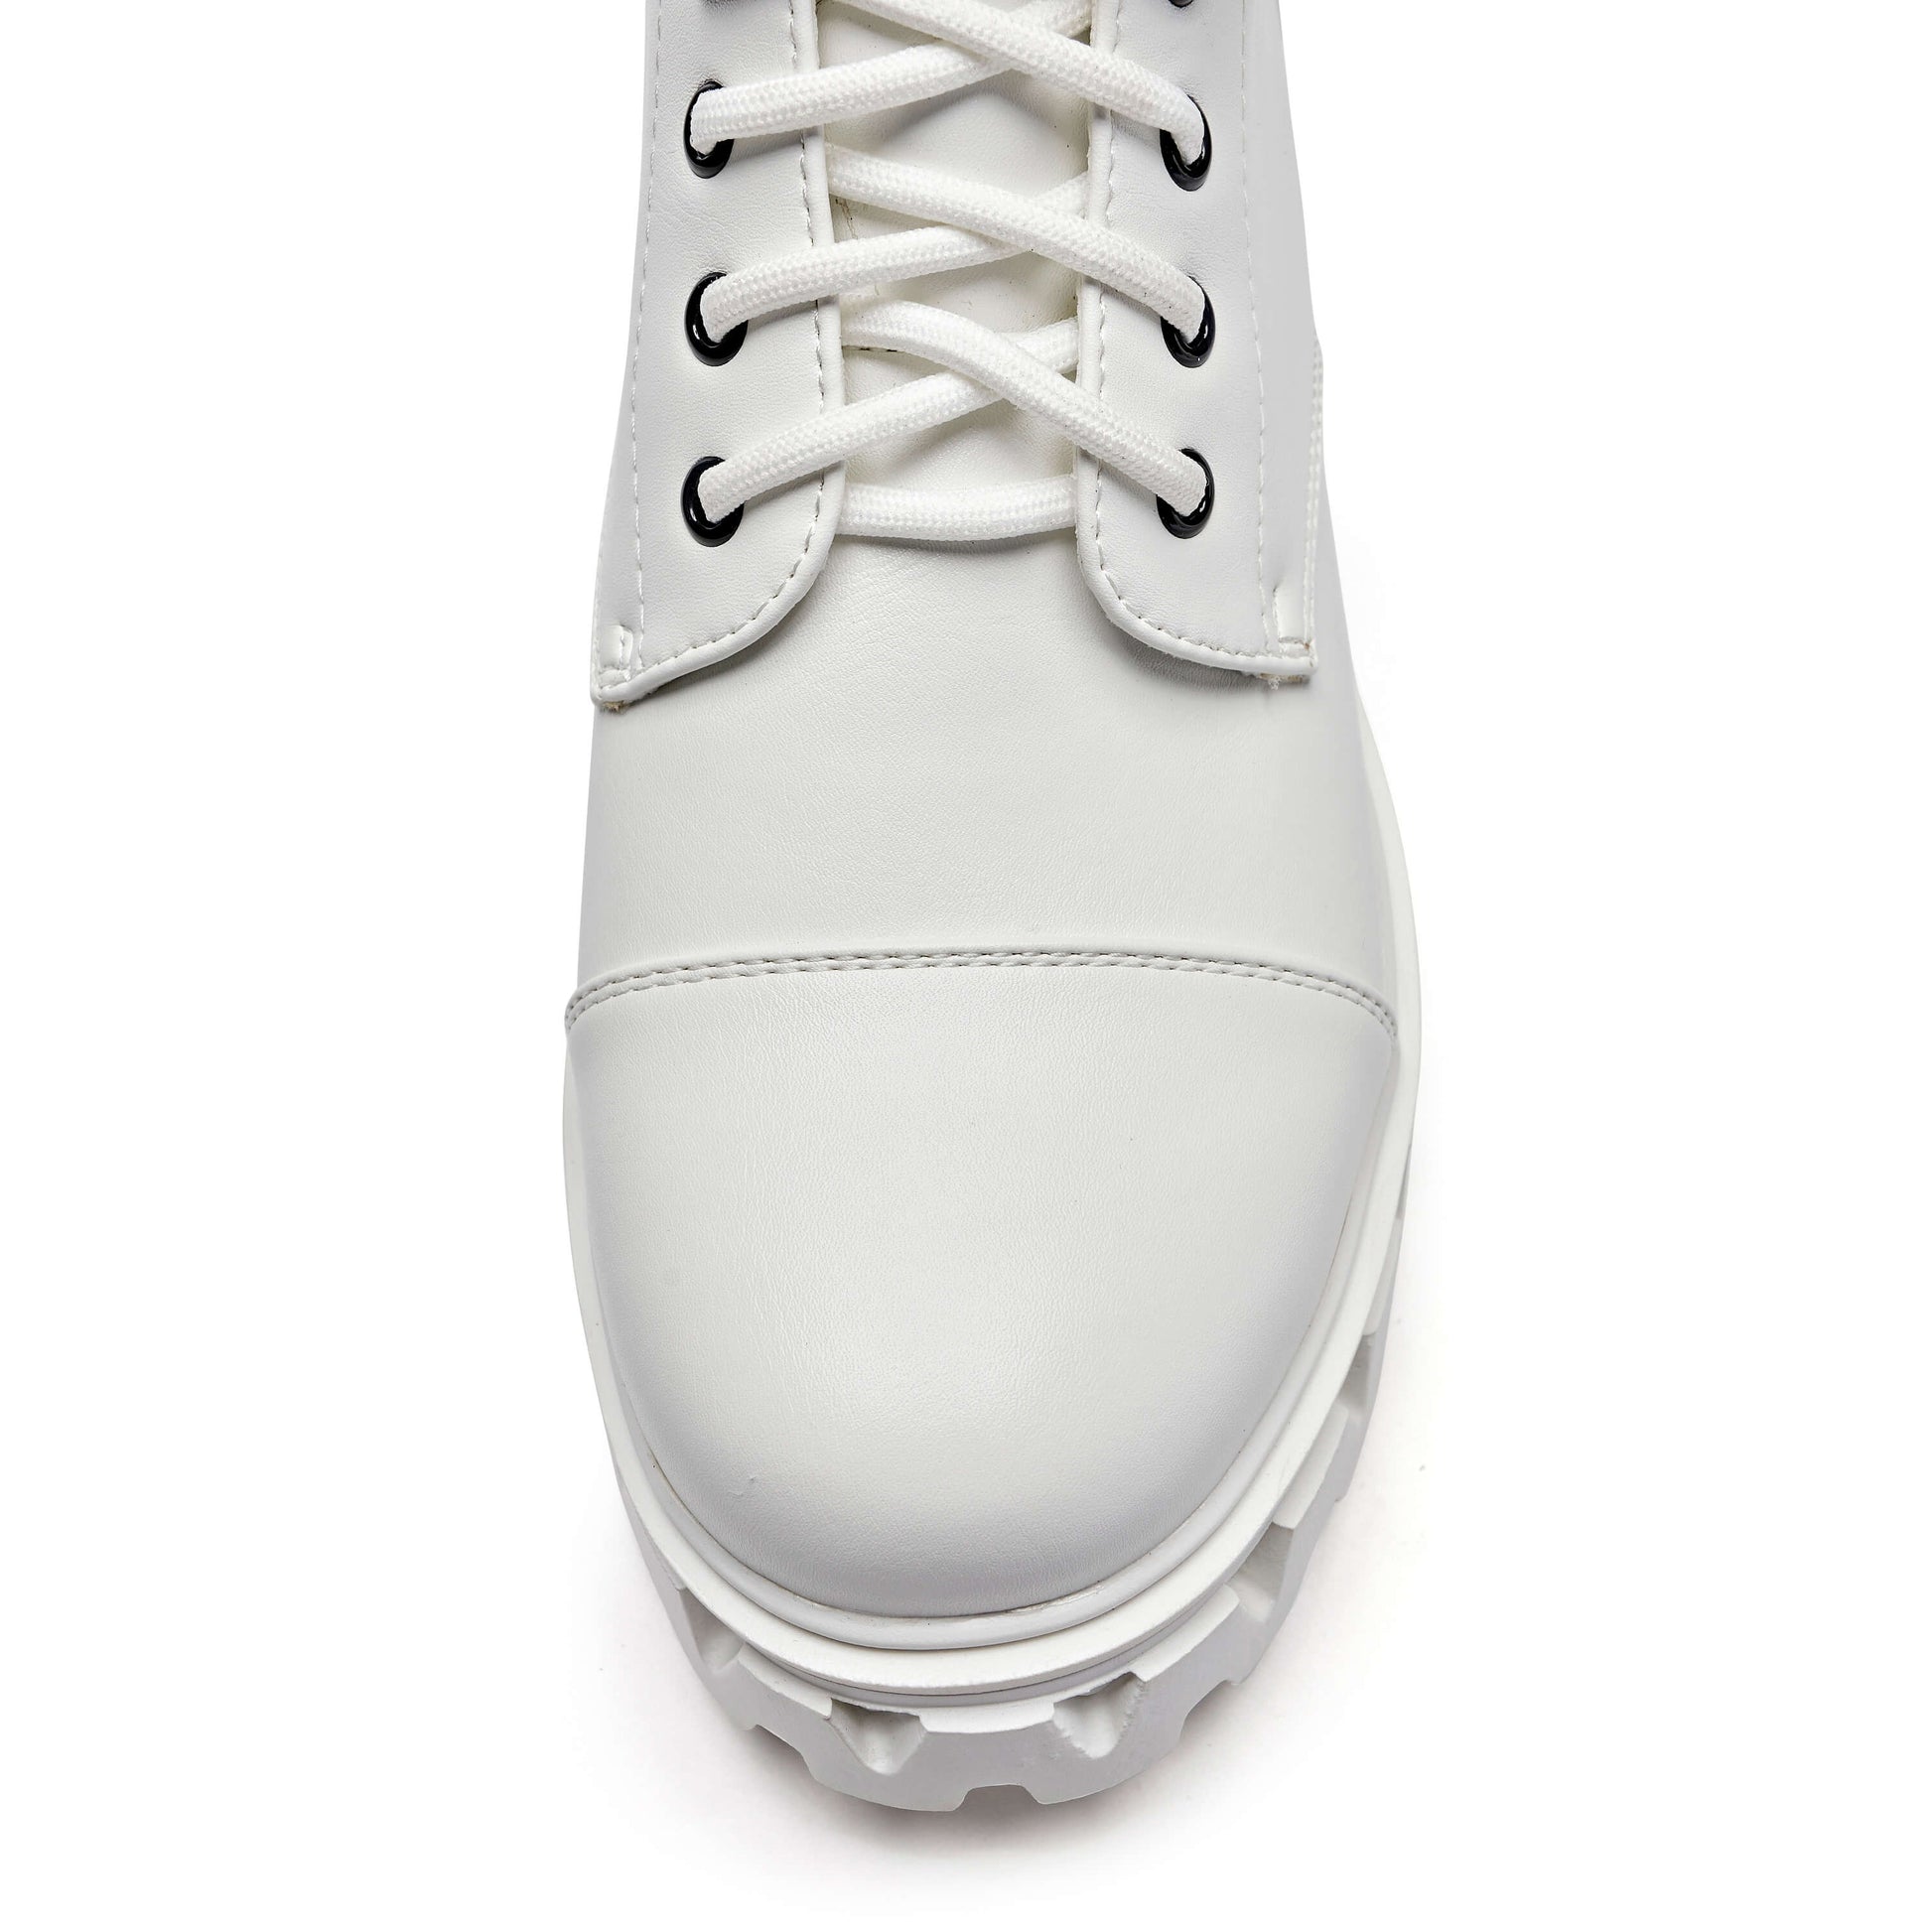 Banshee White Boots - Ankle Boots - KOI Footwear - White - Top View